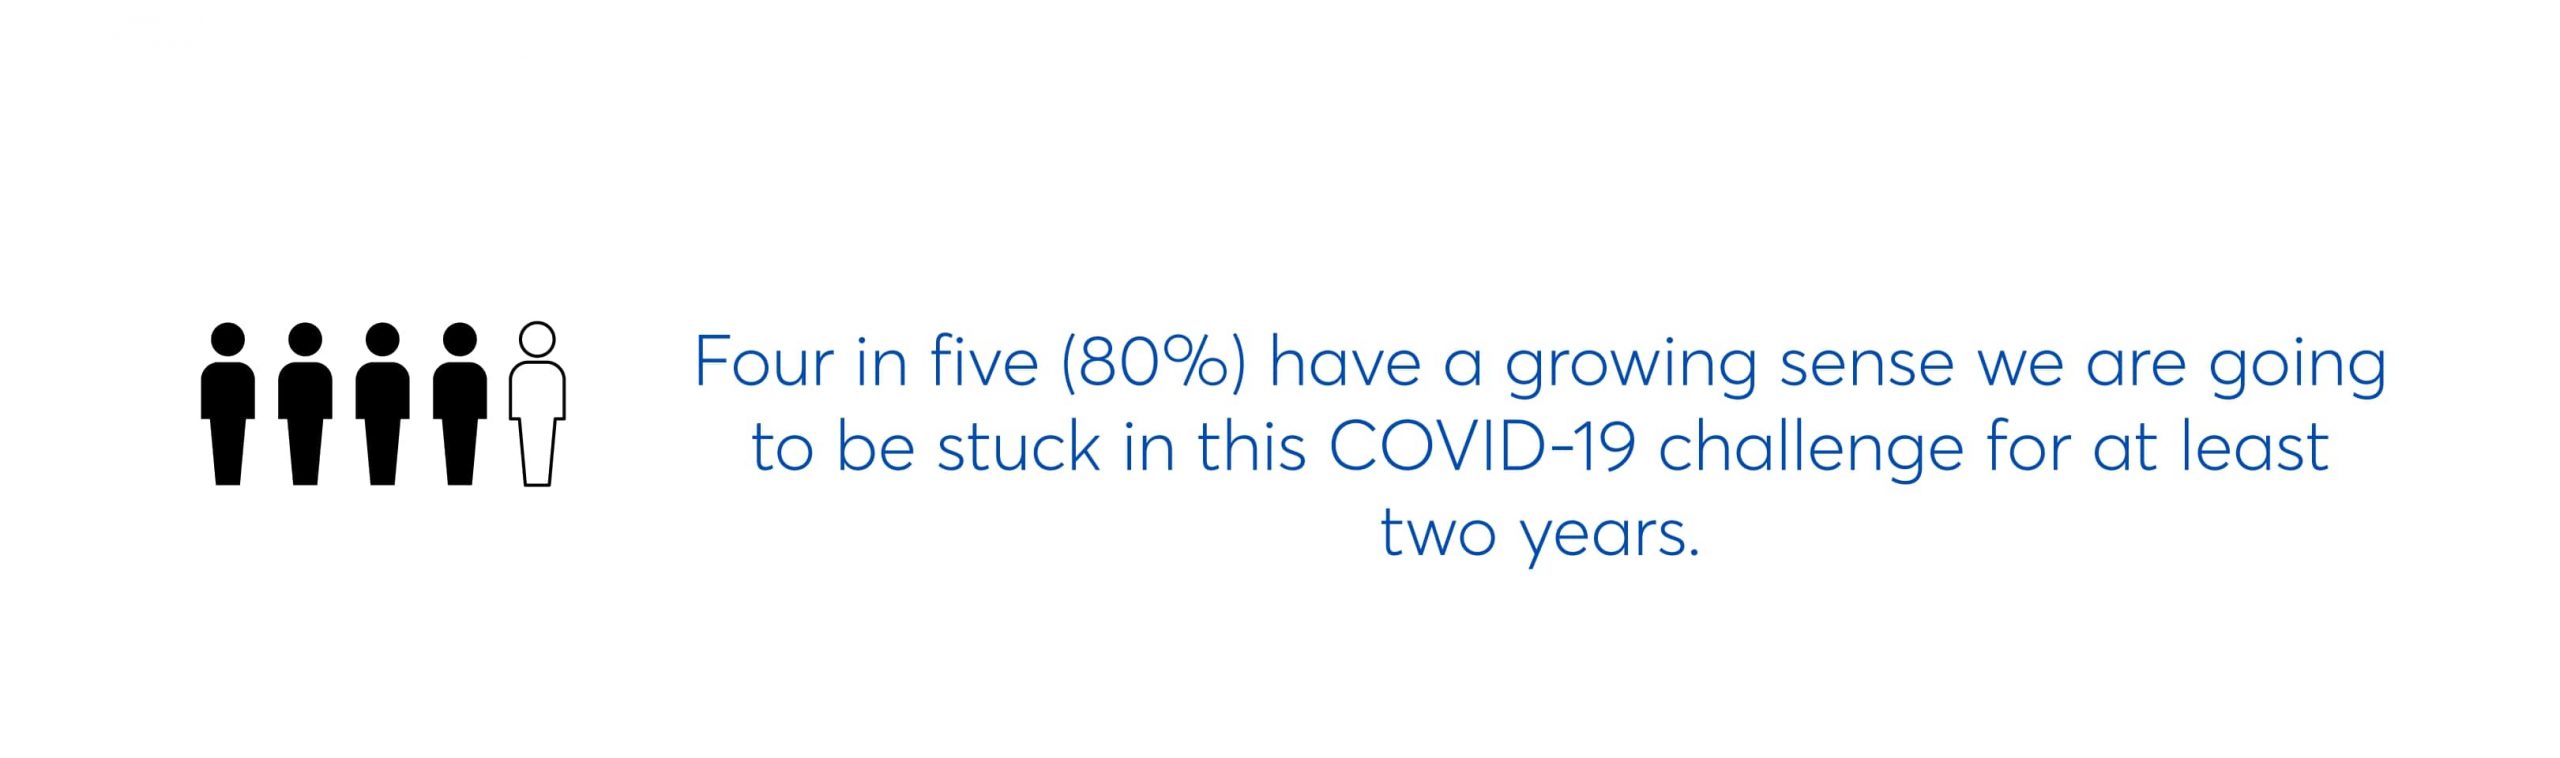 four in five (80%) have a growing sense we are going to be stuck in this covid-19 challenge for at least two years